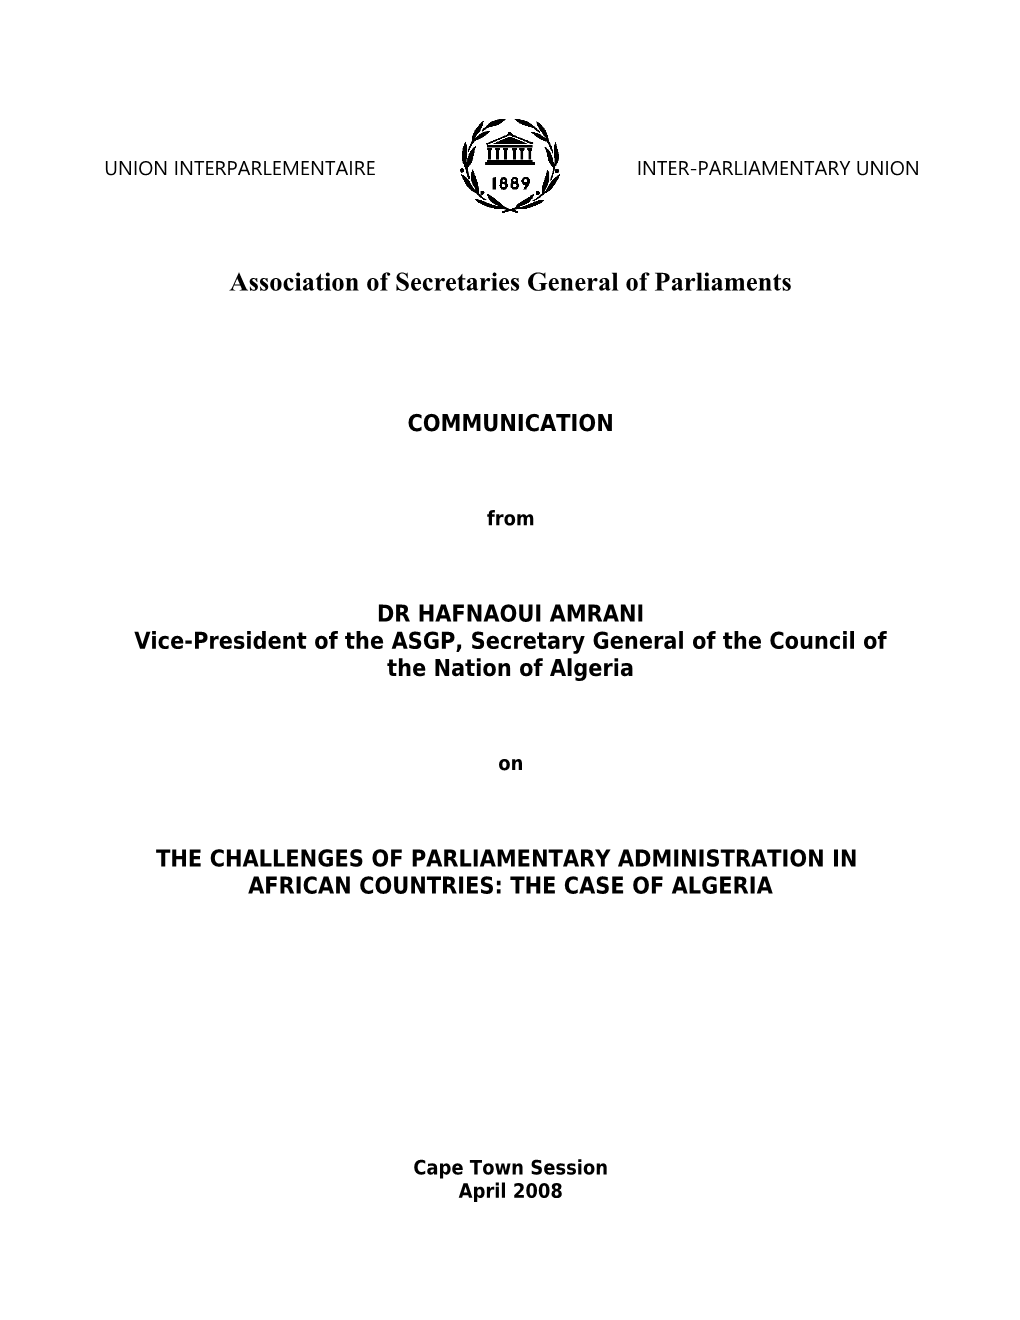 The Challenges of Parliamentary Administration in African Countries: Algeria As a Case Study